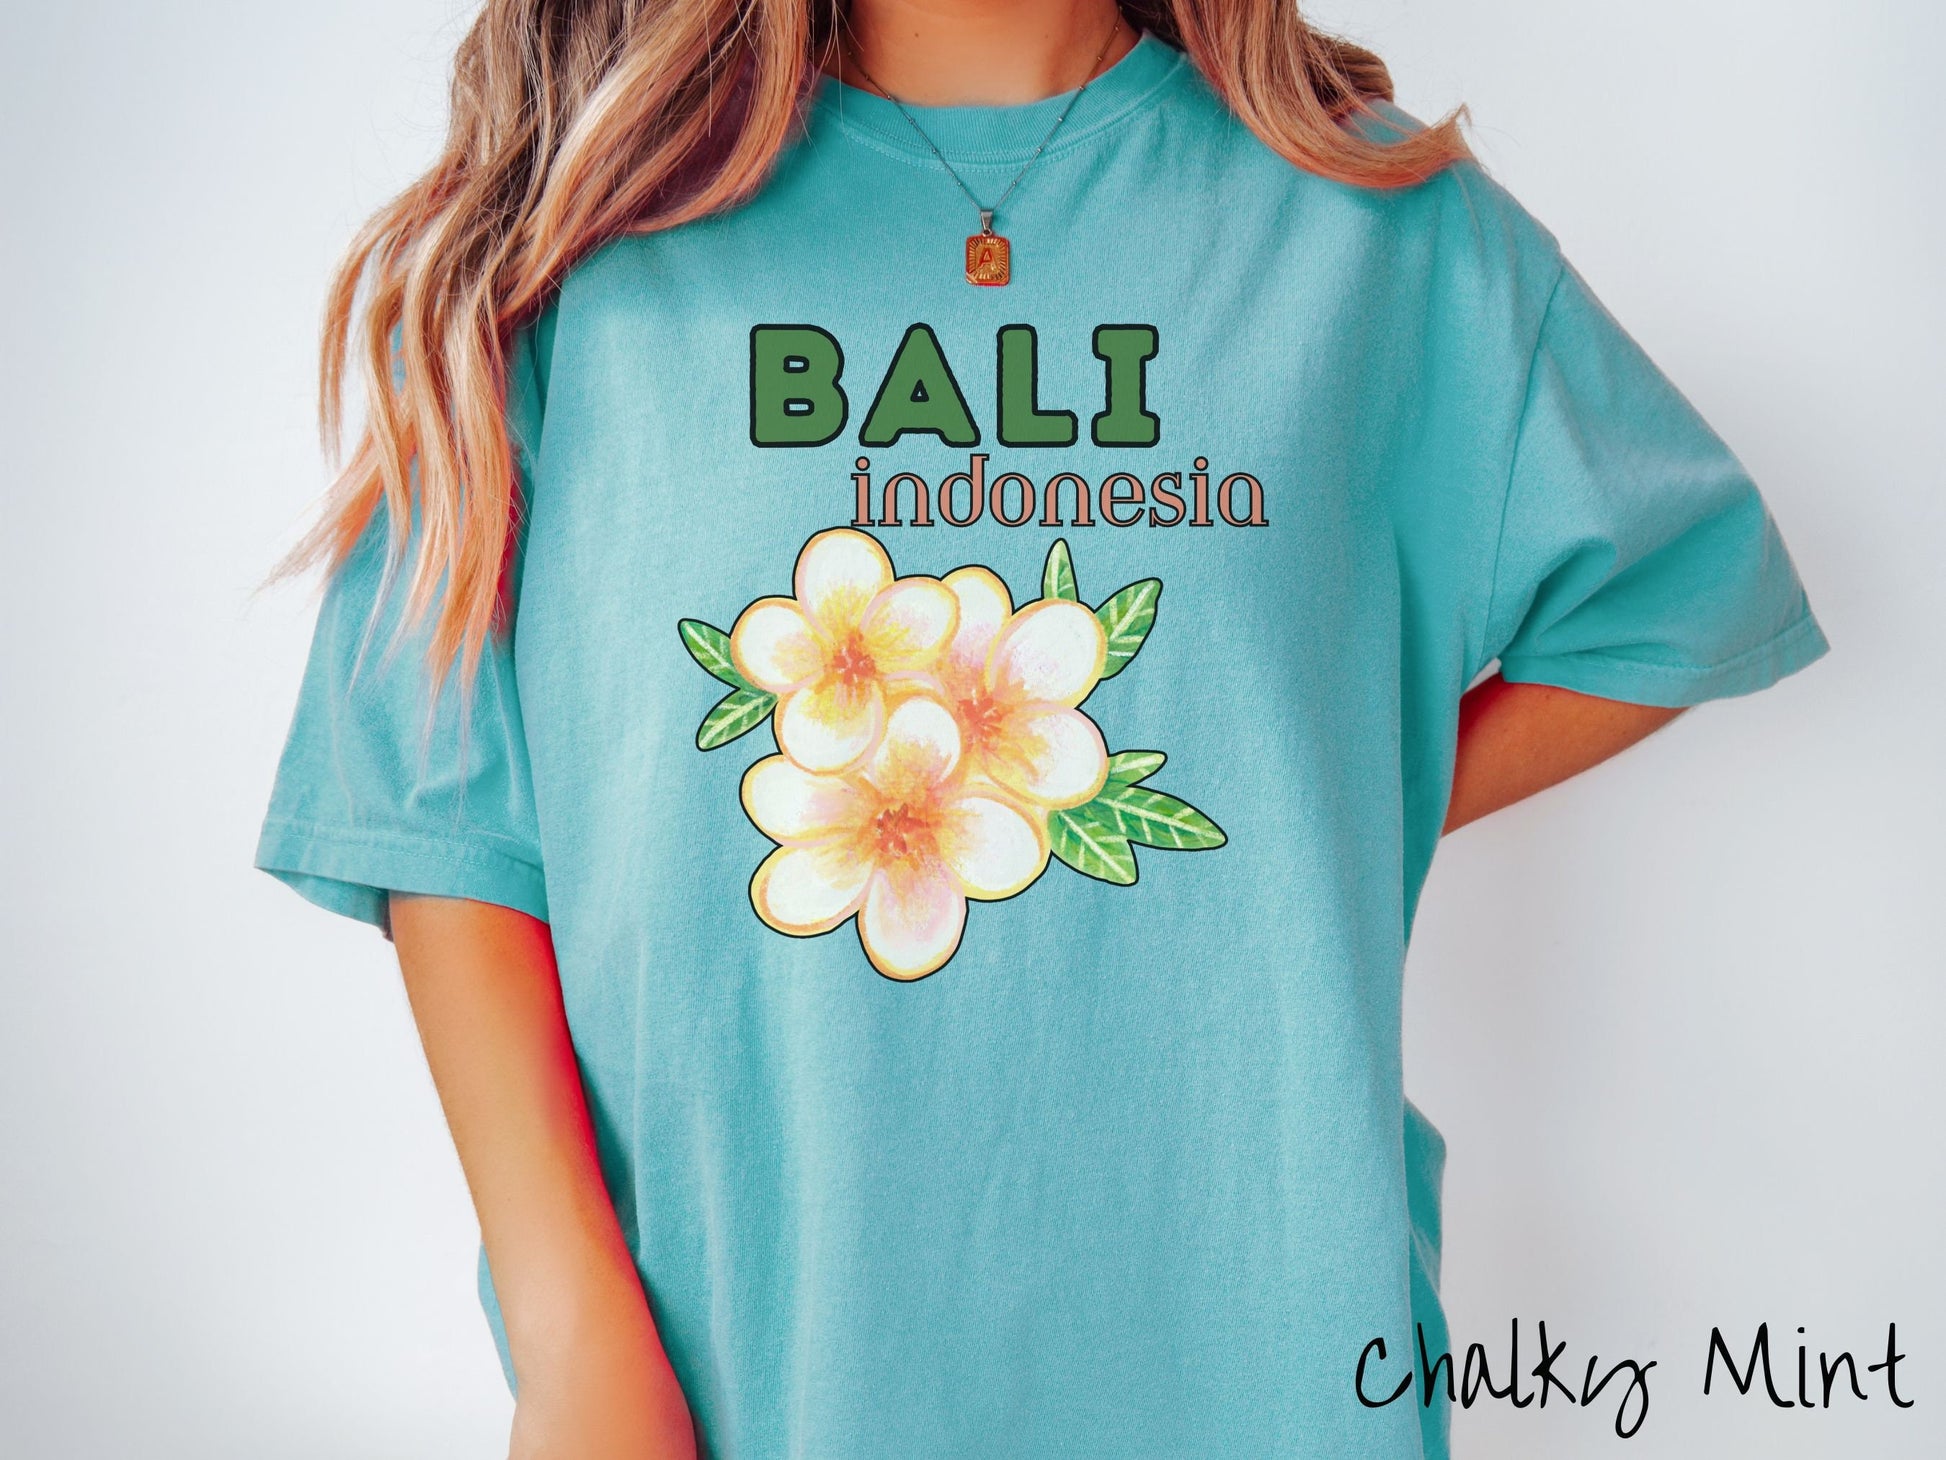 A woman wearing a vintage, chalky mint colored shirt with the text Bali Indonesia in green and yellow font, respectively, and a picture underneath of three beautiful yellow and orange flowers with green leaves.